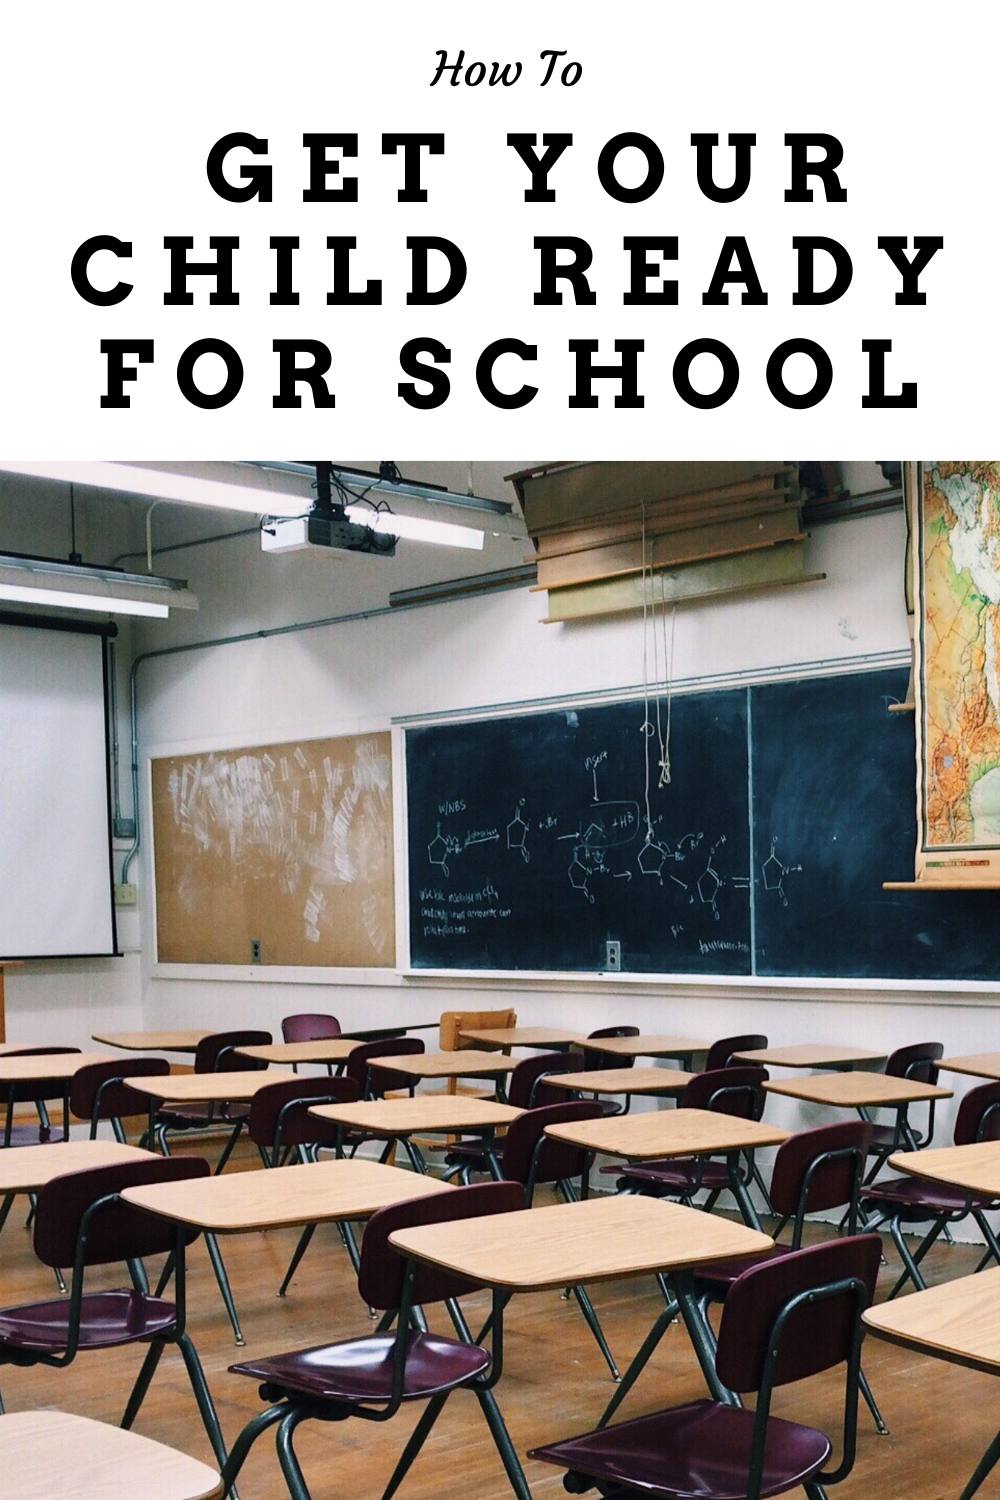 How to Get Your Child Ready for School